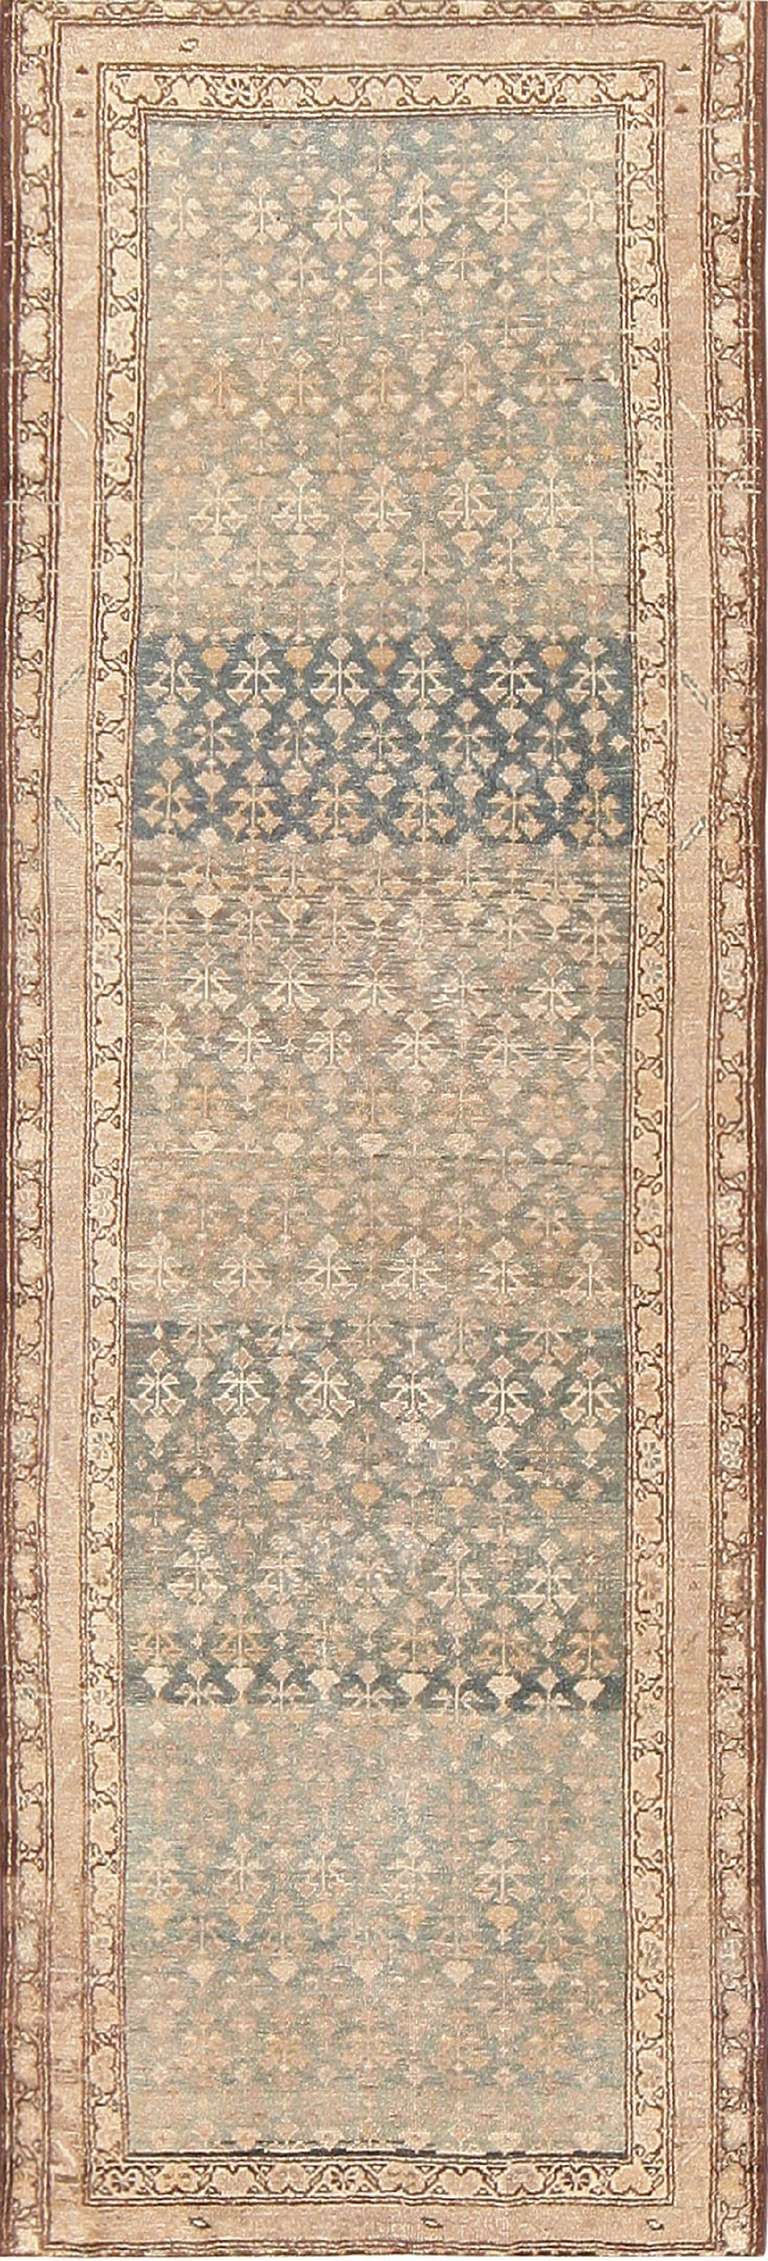 Here is a wonderful antique Persian Malayer runner, composed of a subdued pallet of of soft golds and blues. A quiet allover design of repeating floral elements, woven in soft gold tones against the blue field, give this Persian rug a characteristic